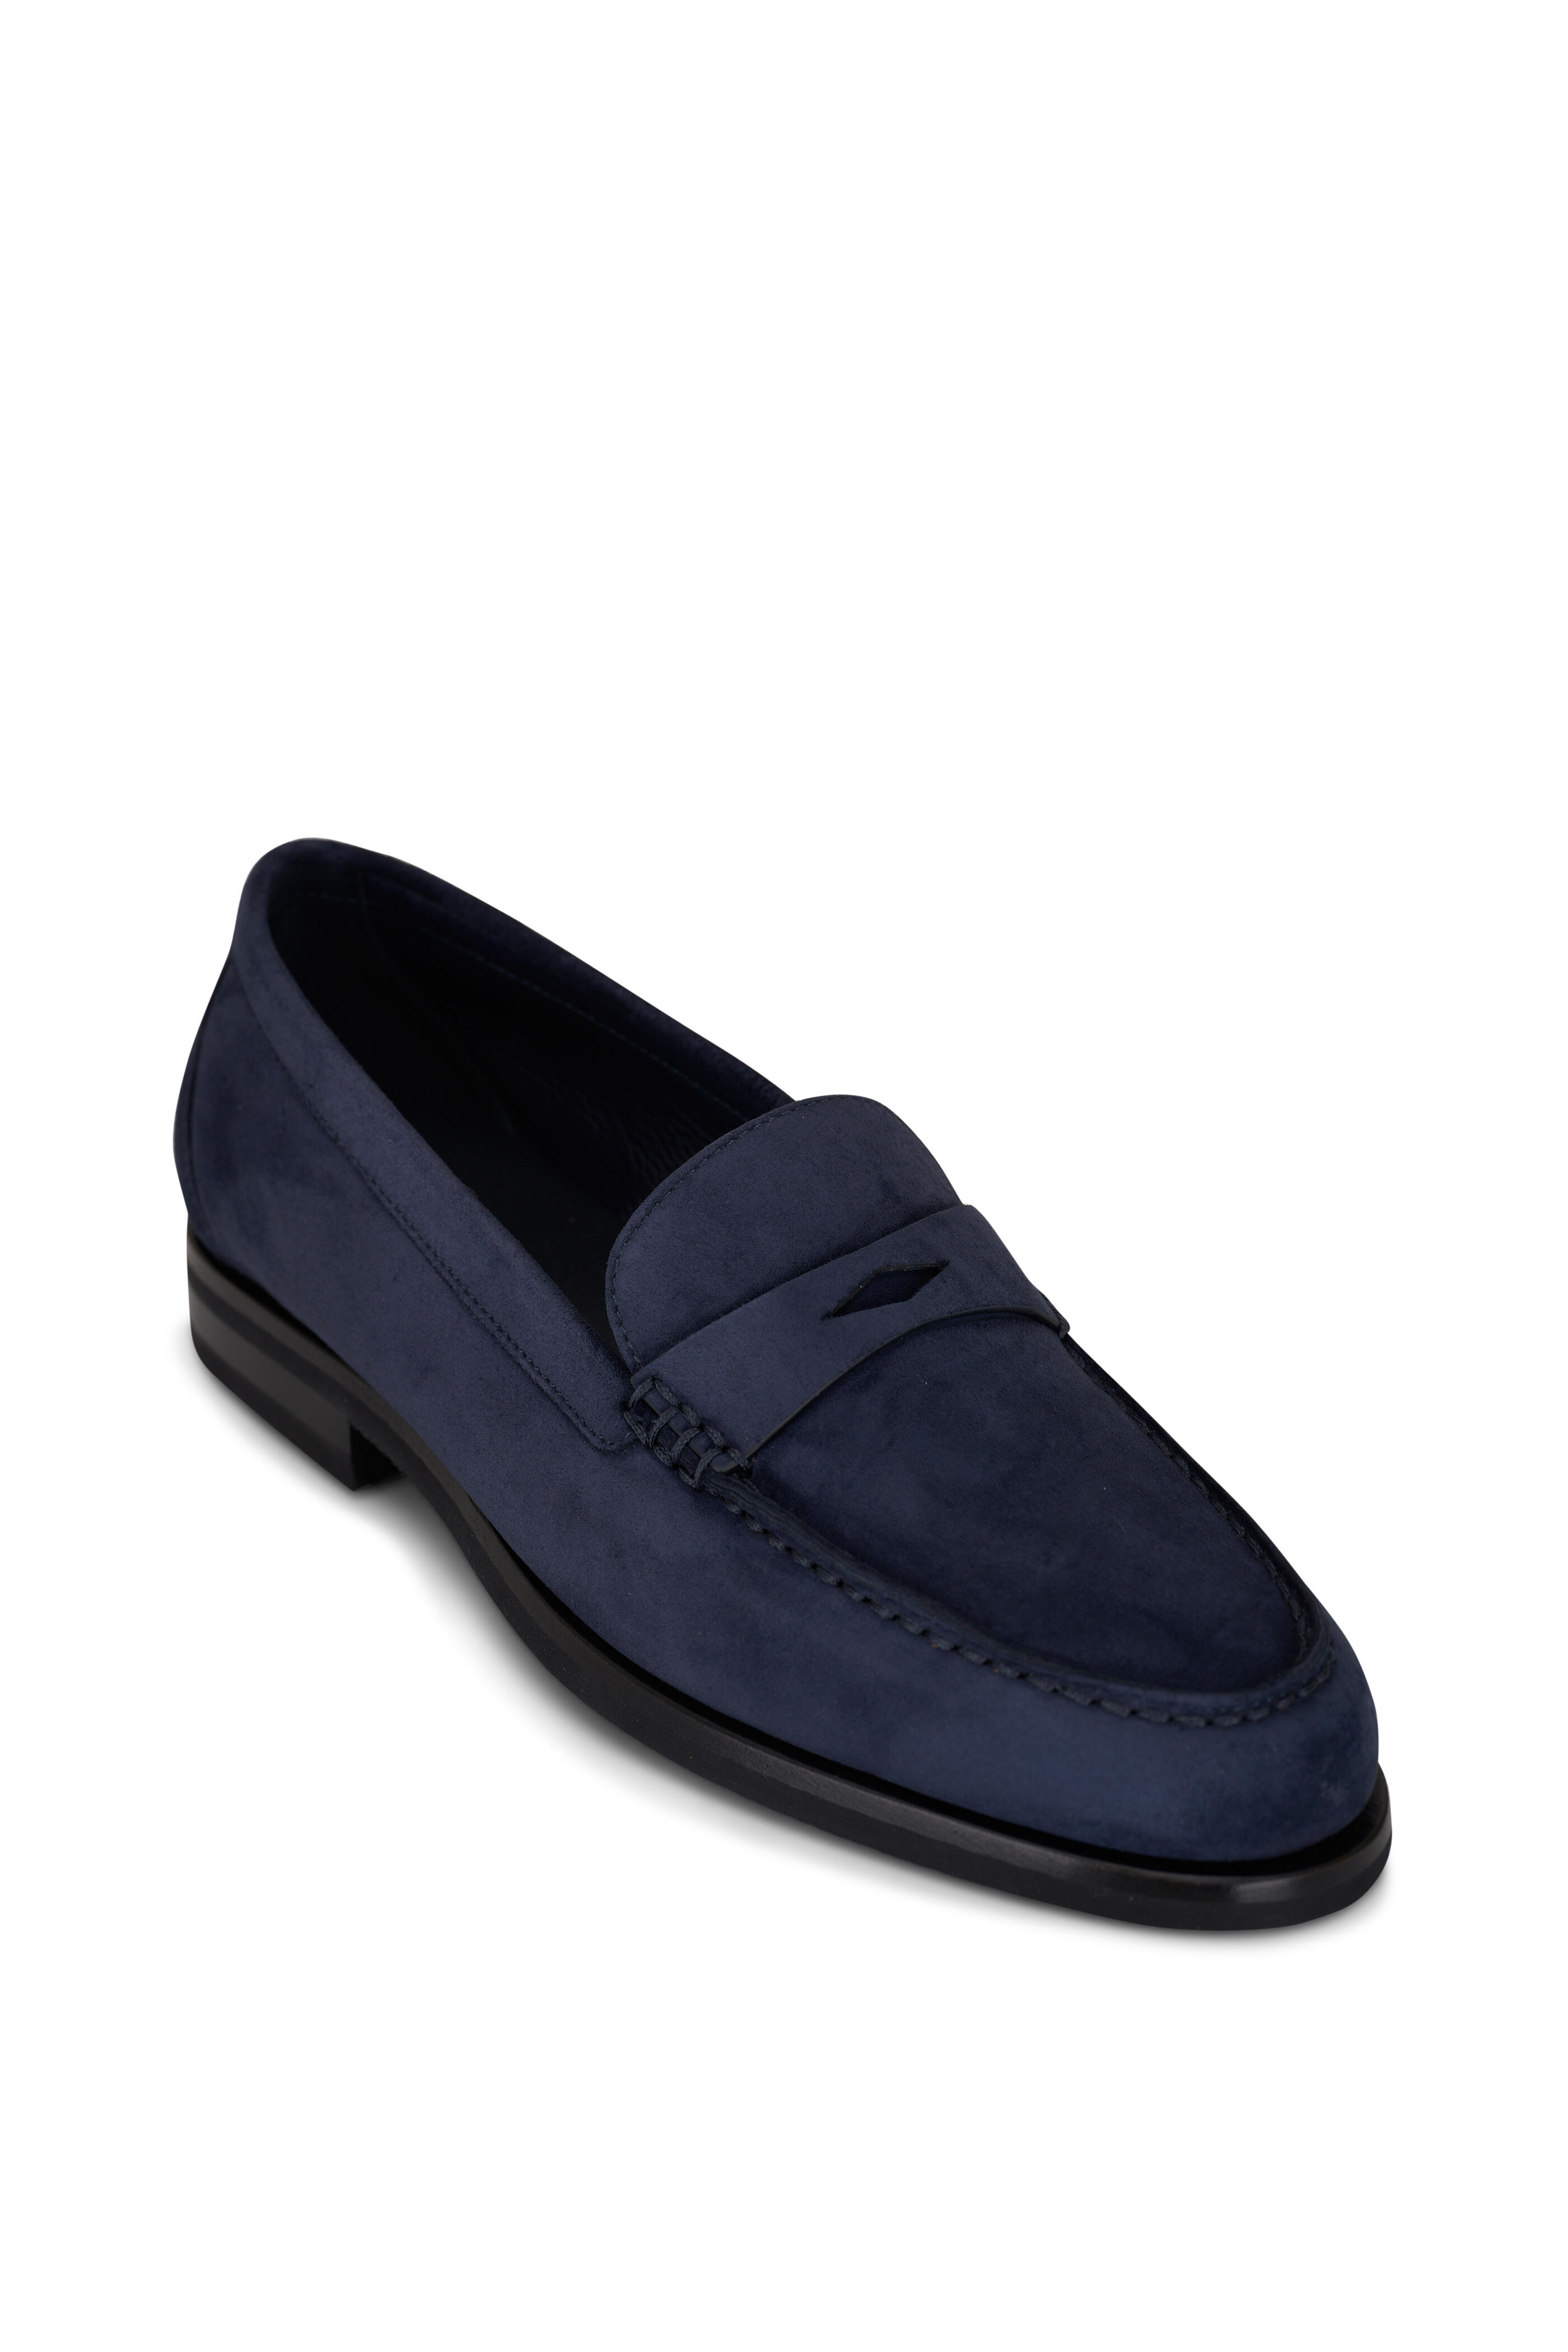 Santoni - Haileigh Navy Suede Penny Loafer | Mitchell Stores